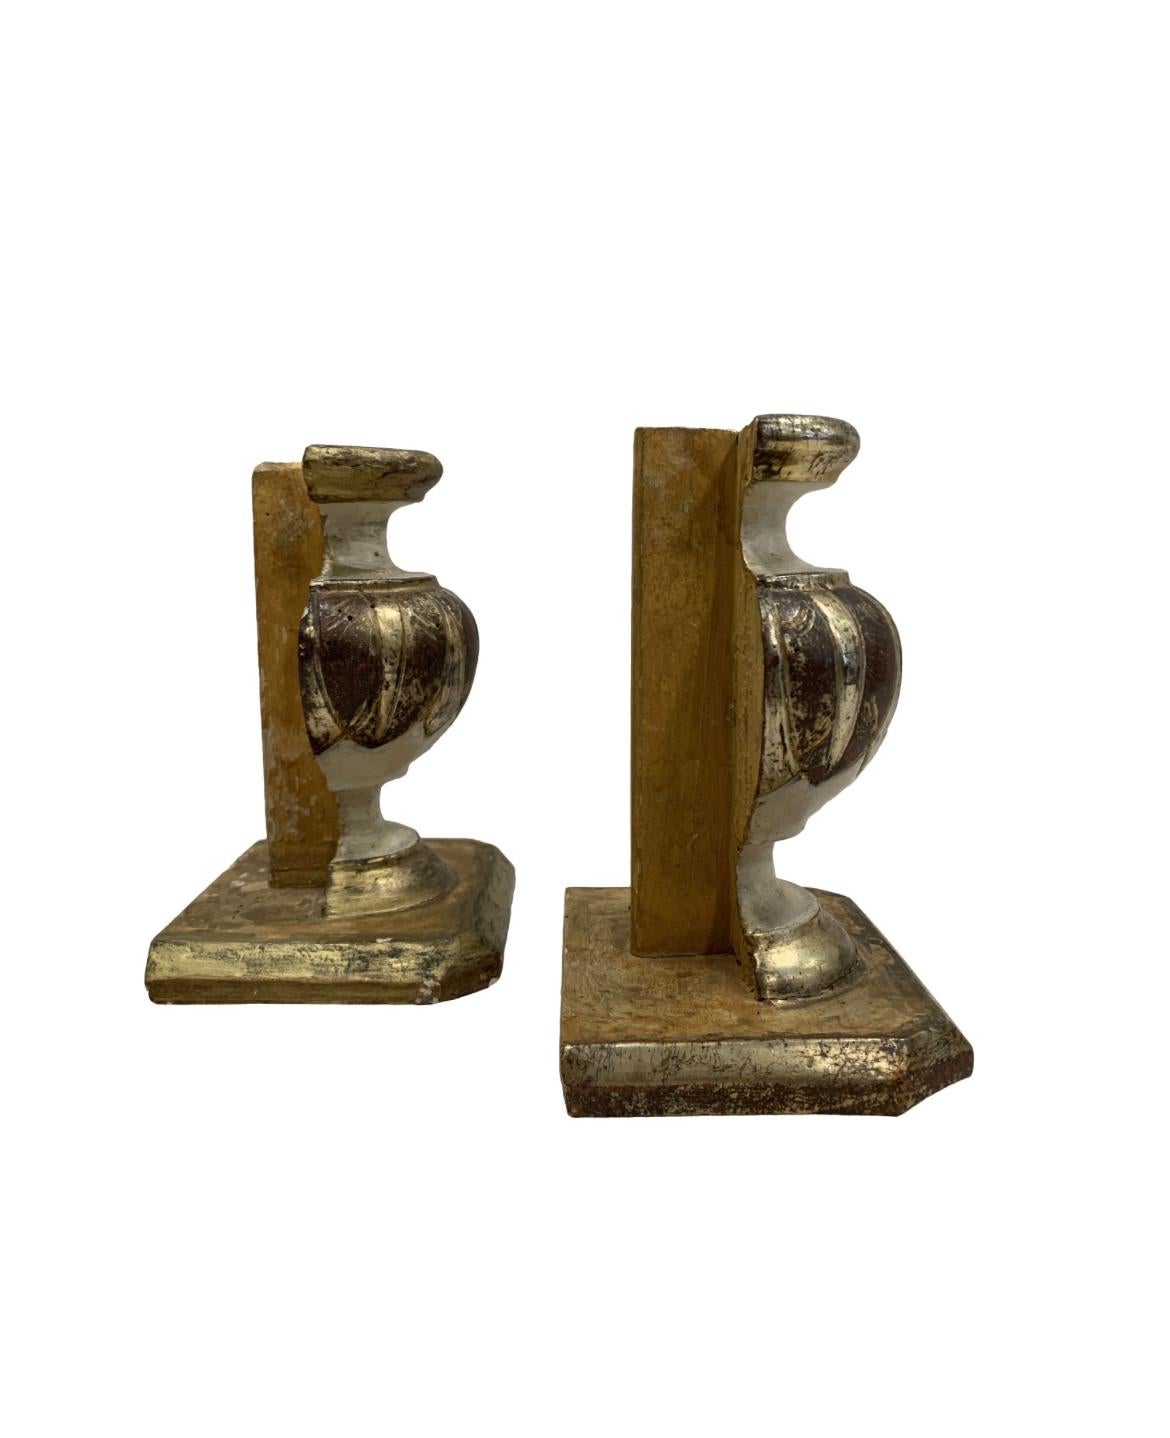 Italian 18th Century Urn Fragments in Original Paint and Gilt, Pair For Sale